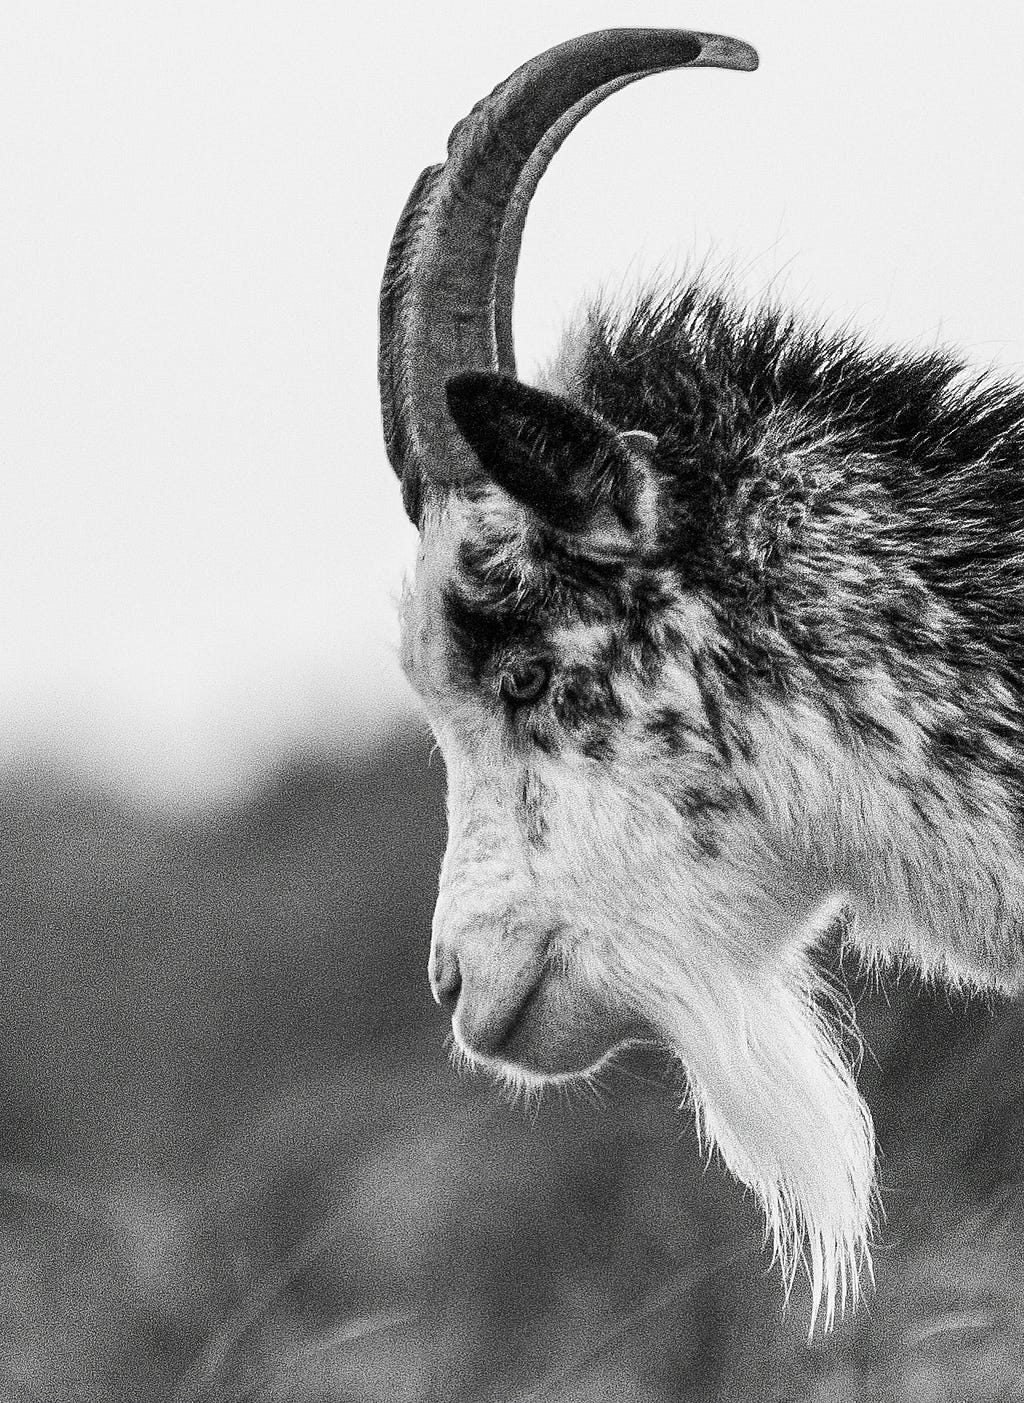 A headshot in profile of a small black and white goat with curved horns and a white beard.